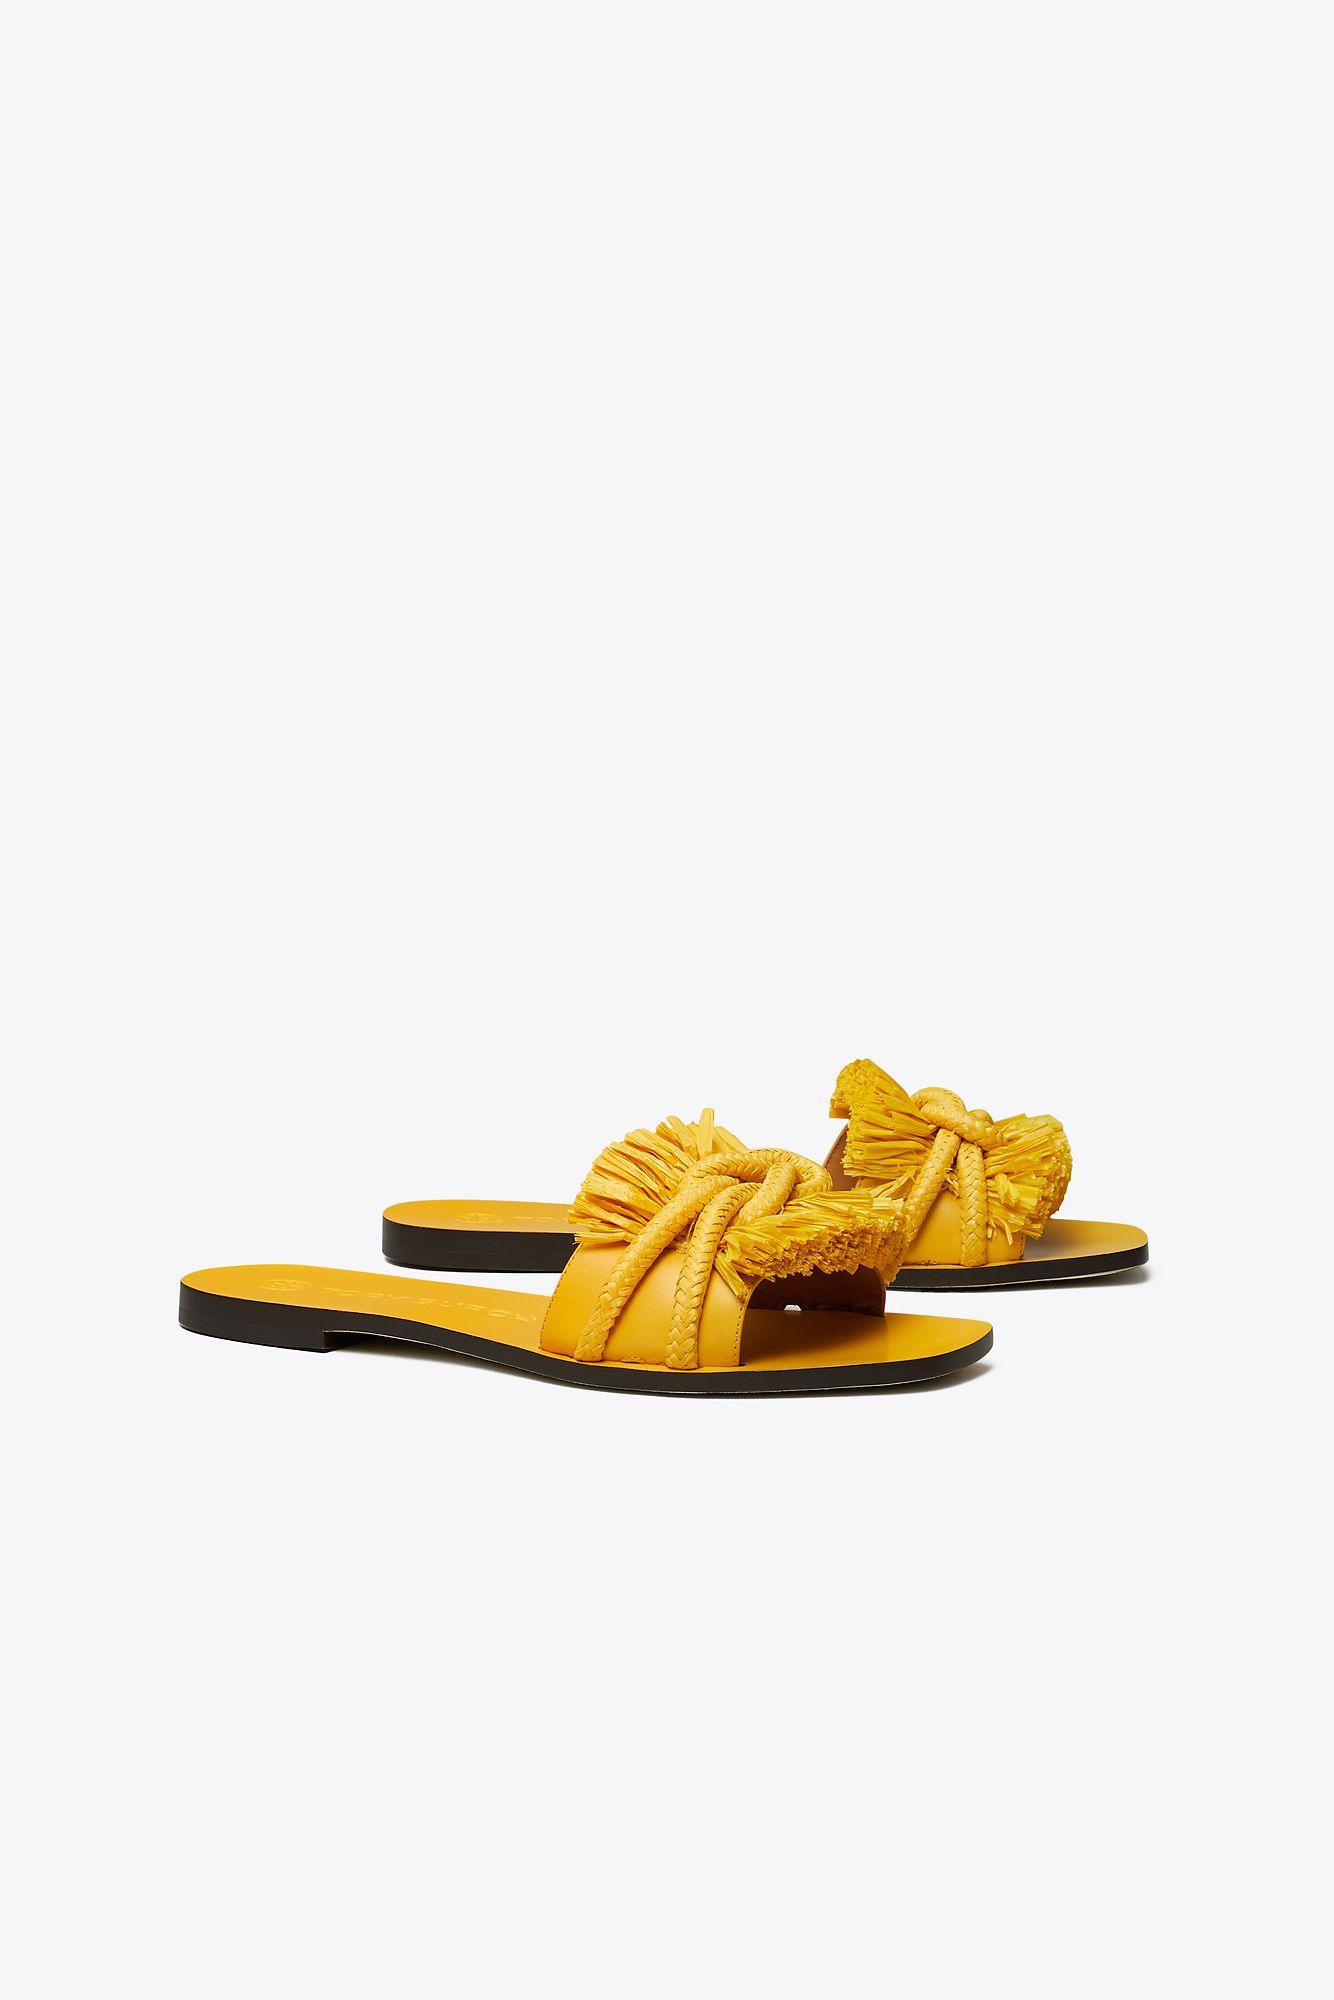 Tory Burch Rope Flat Slide in Yellow | Lyst